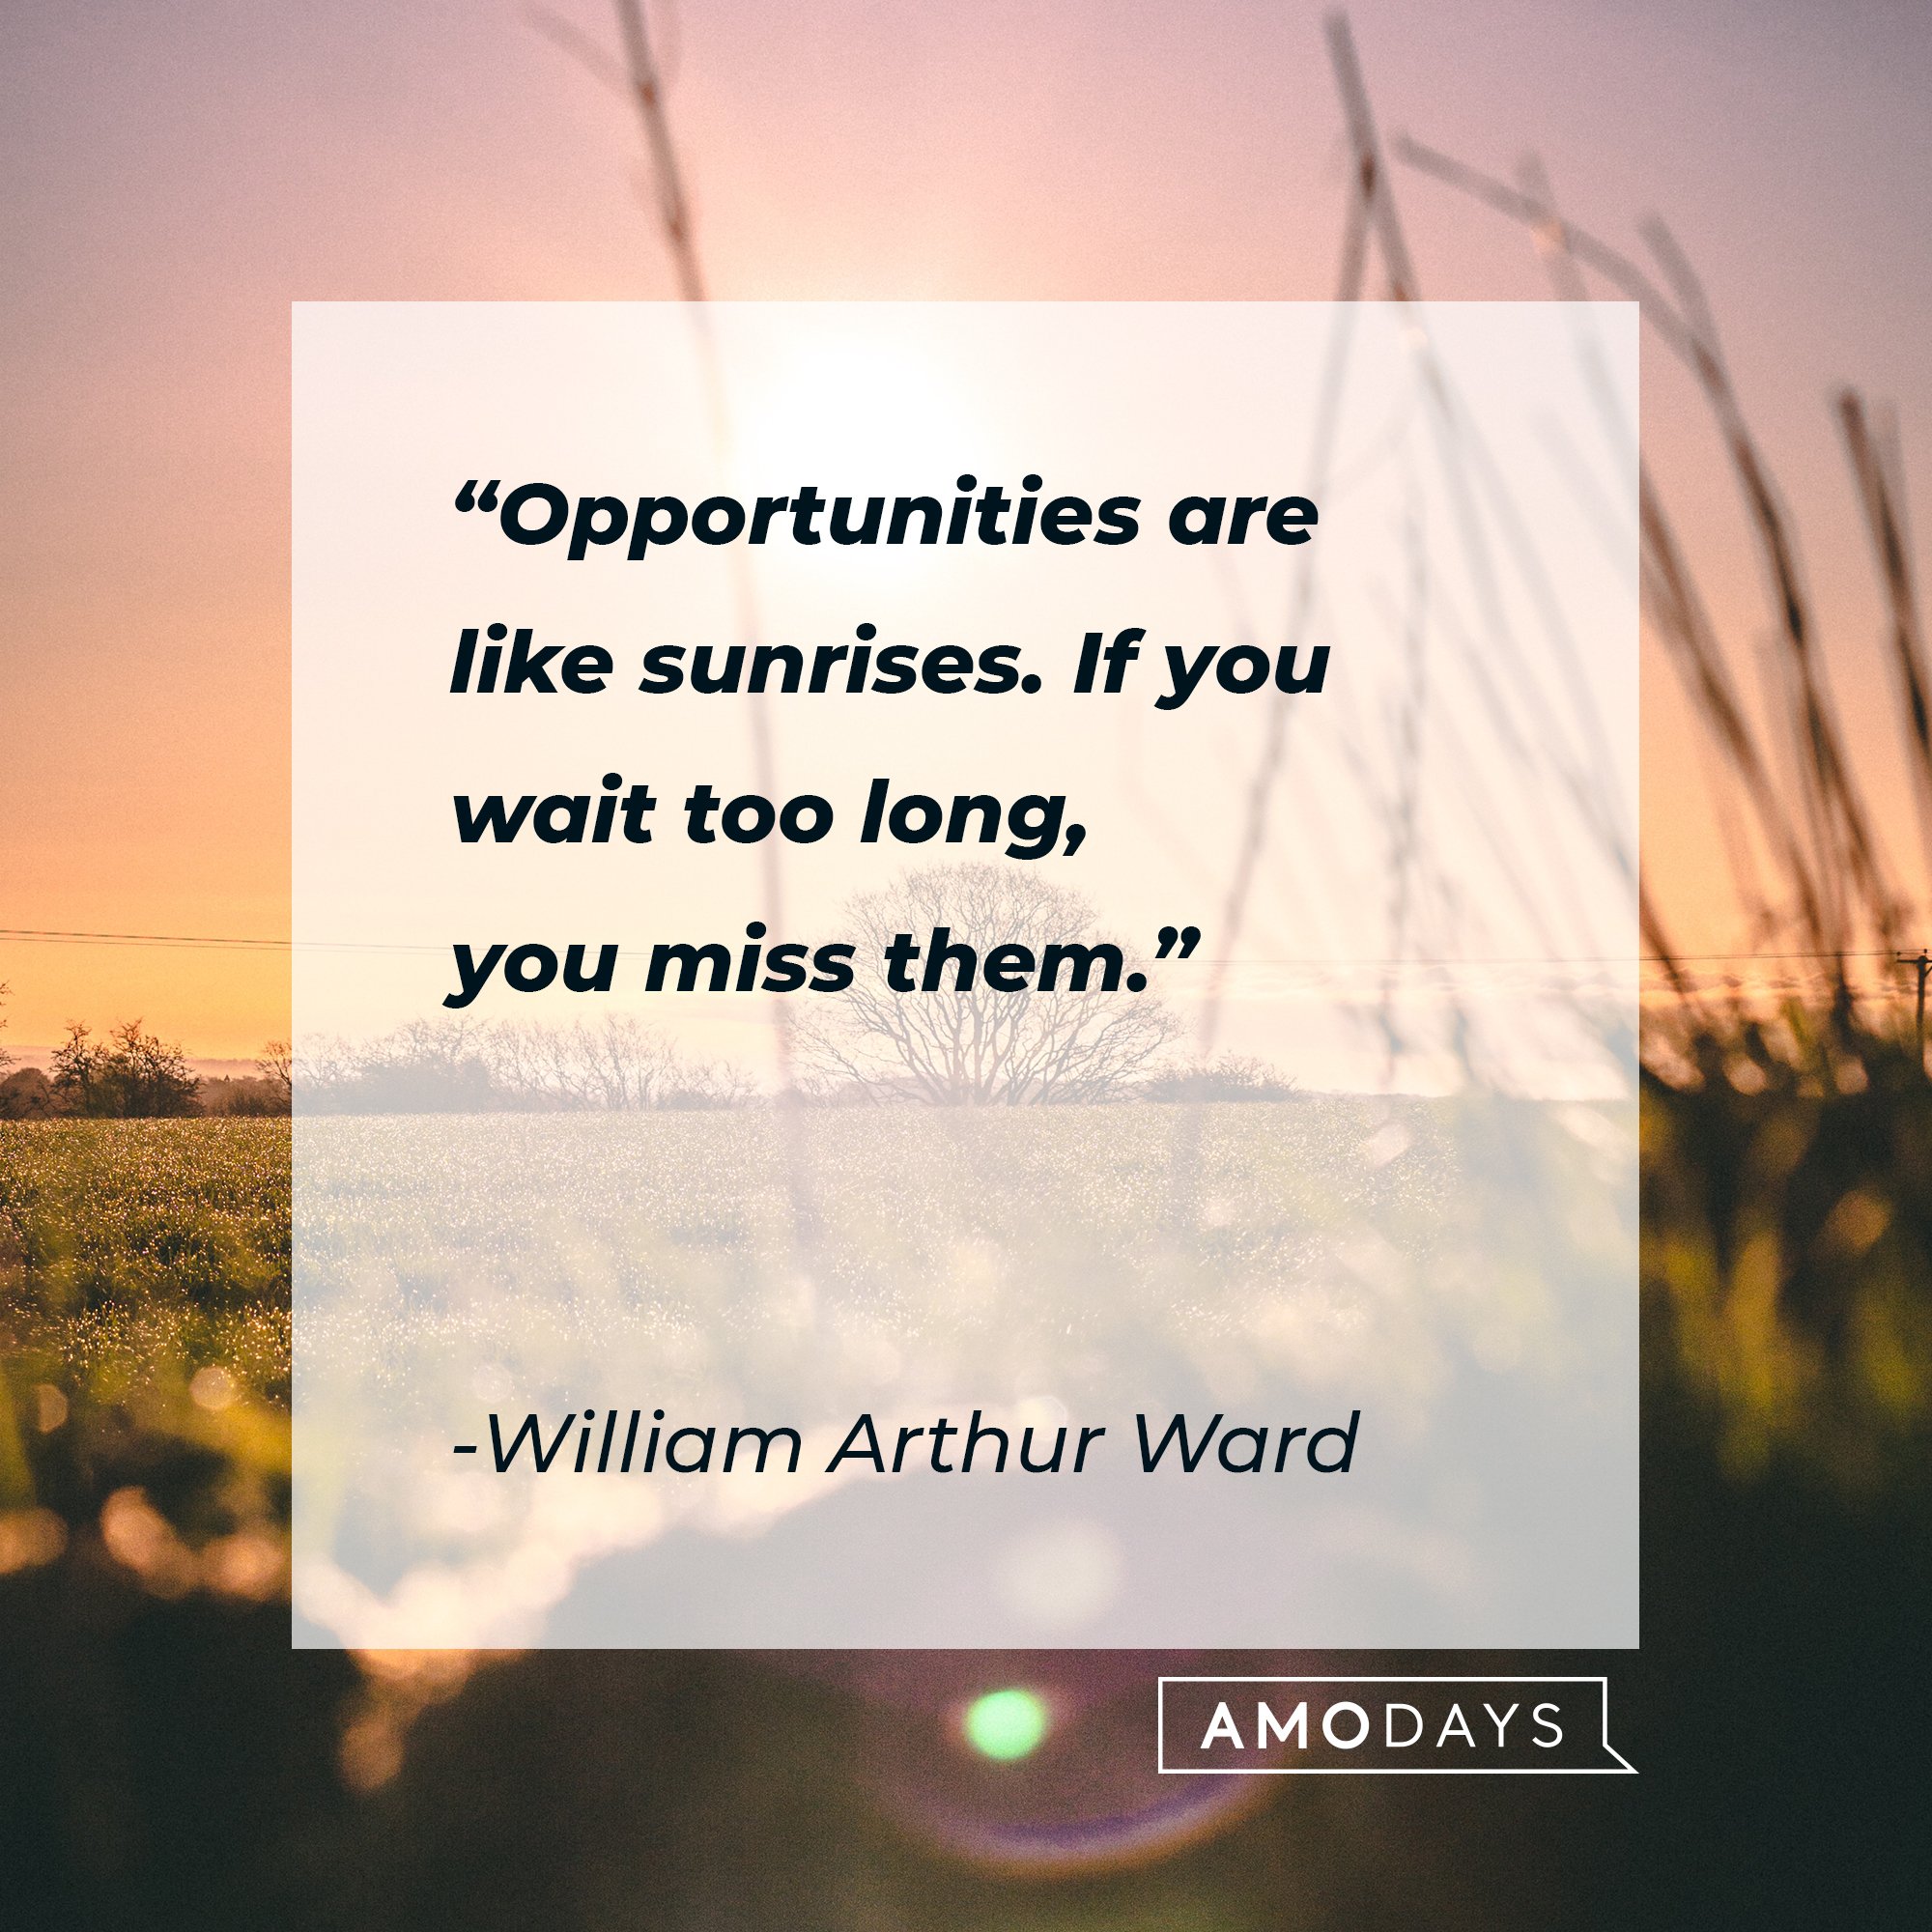 William Arthur Ward's quote: "Opportunities are like sunrises. If you wait too long, you miss them." | Image: AmoDays 